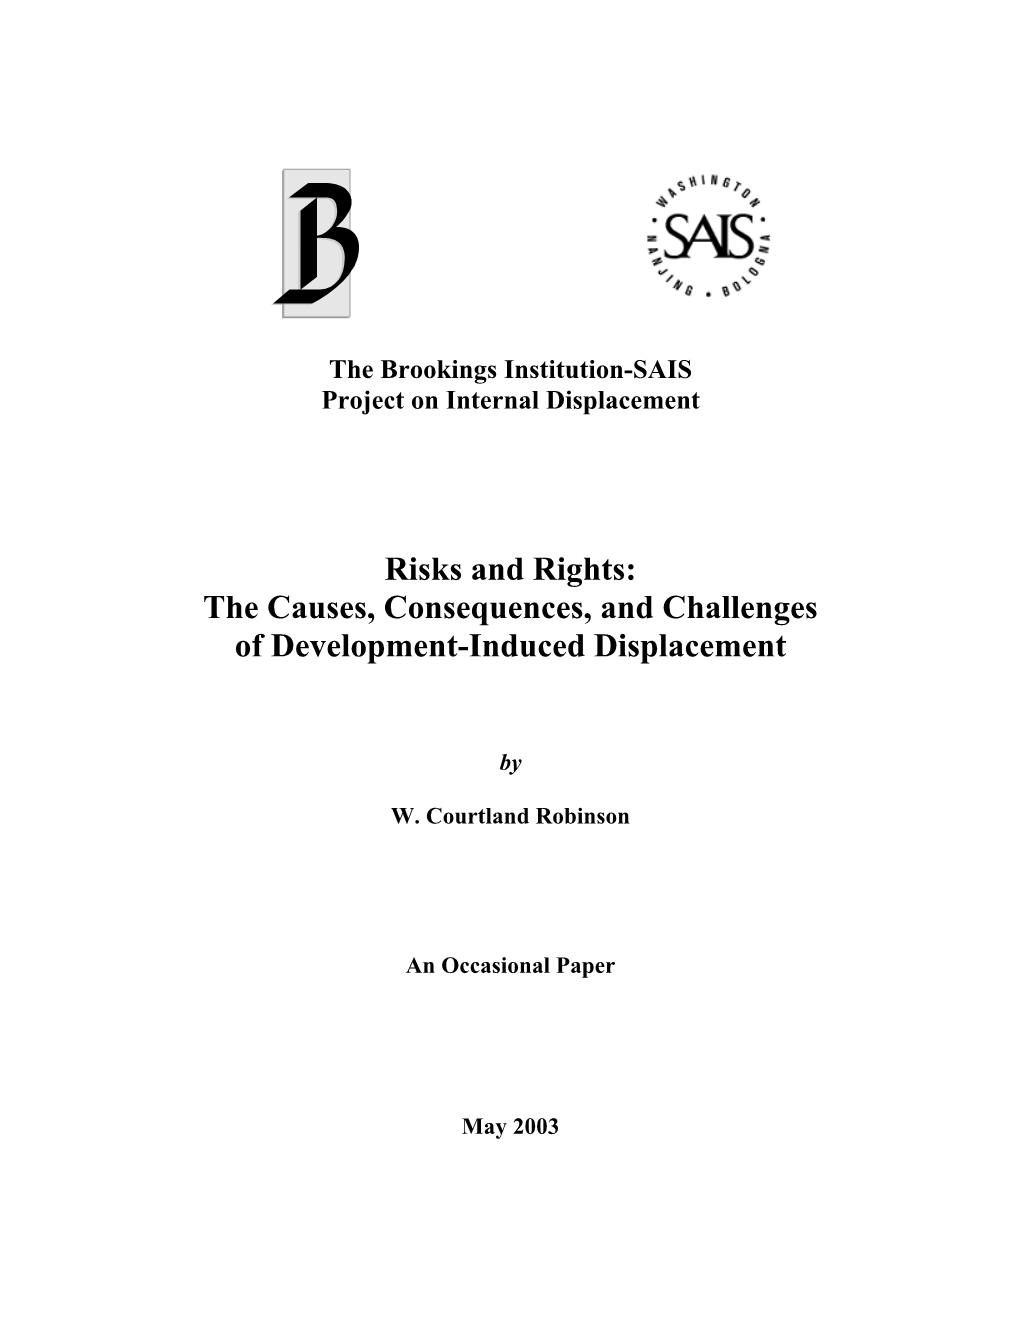 Risks and Rights: the Causes, Consequences, and Challenges of Development-Induced Displacement